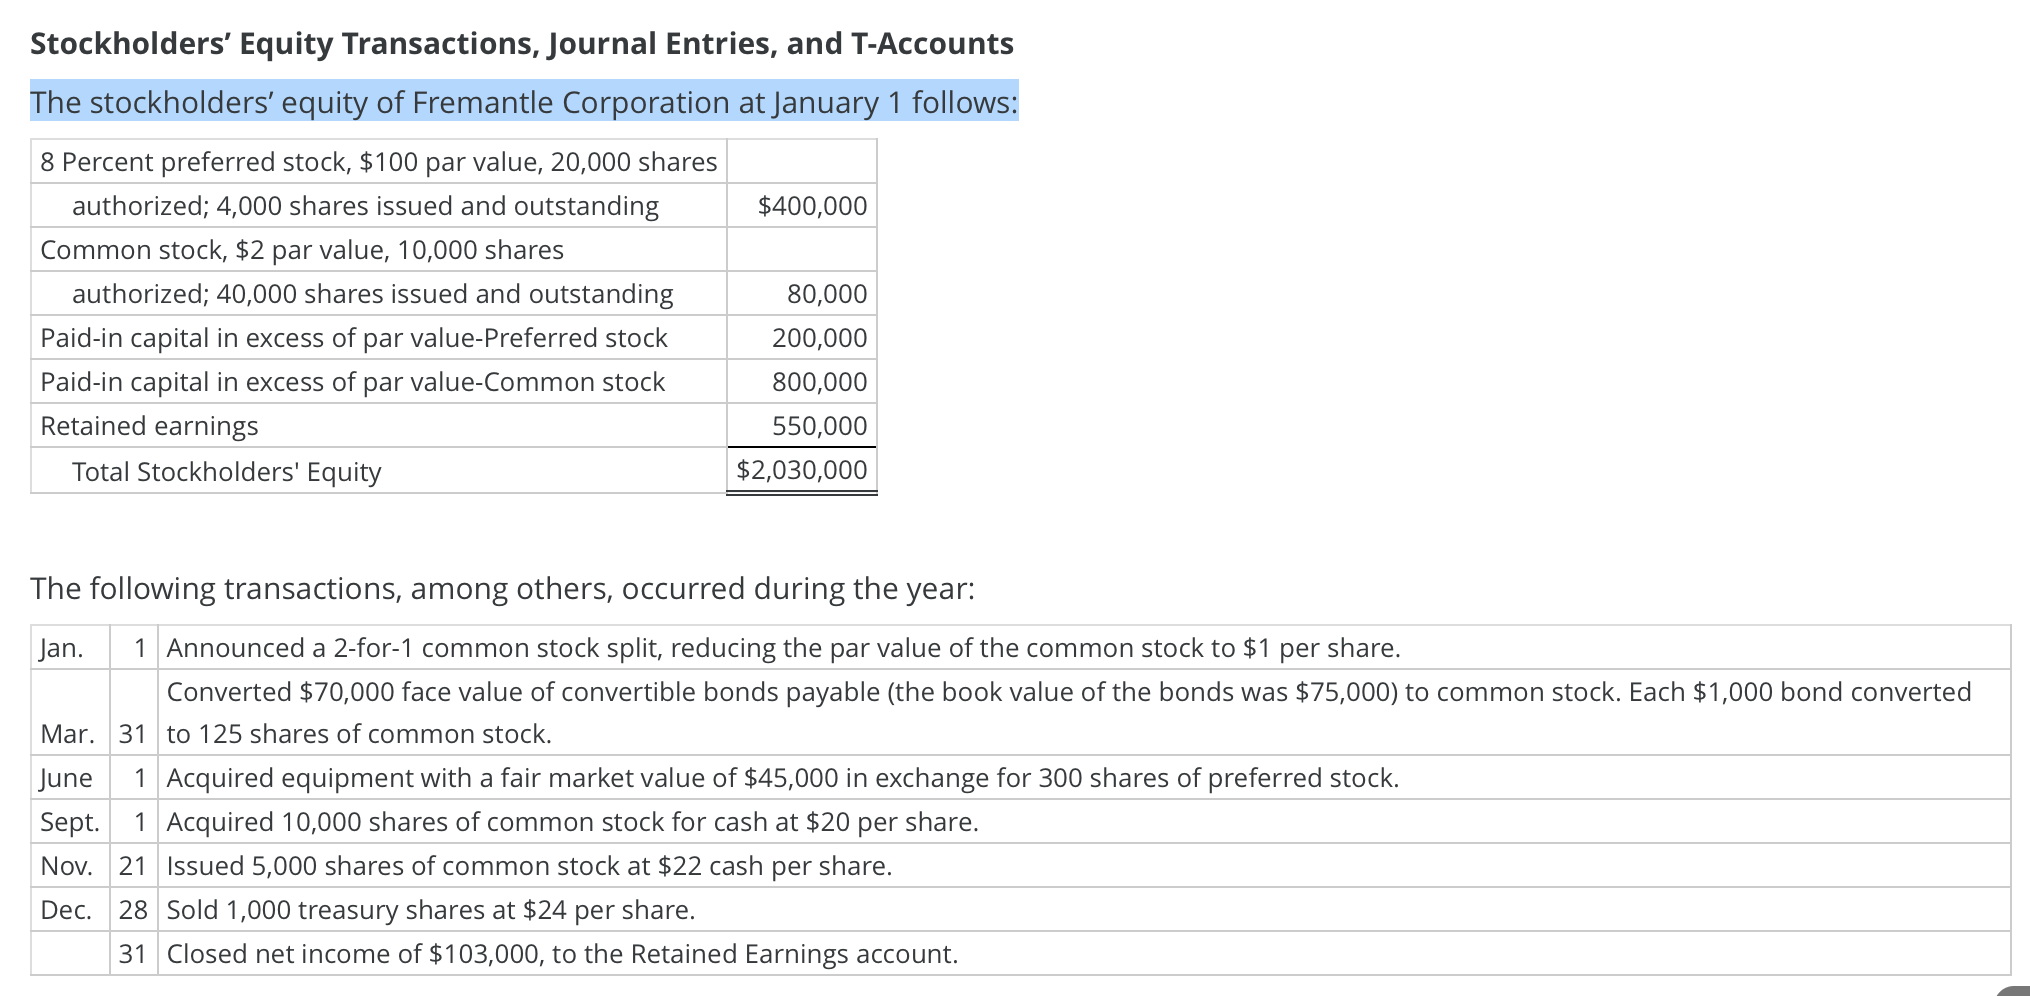 Stockholders Equity Transactions, Journal Entries, and T-AccountsThe stockholders equity of Fremantle Corporation at Janua